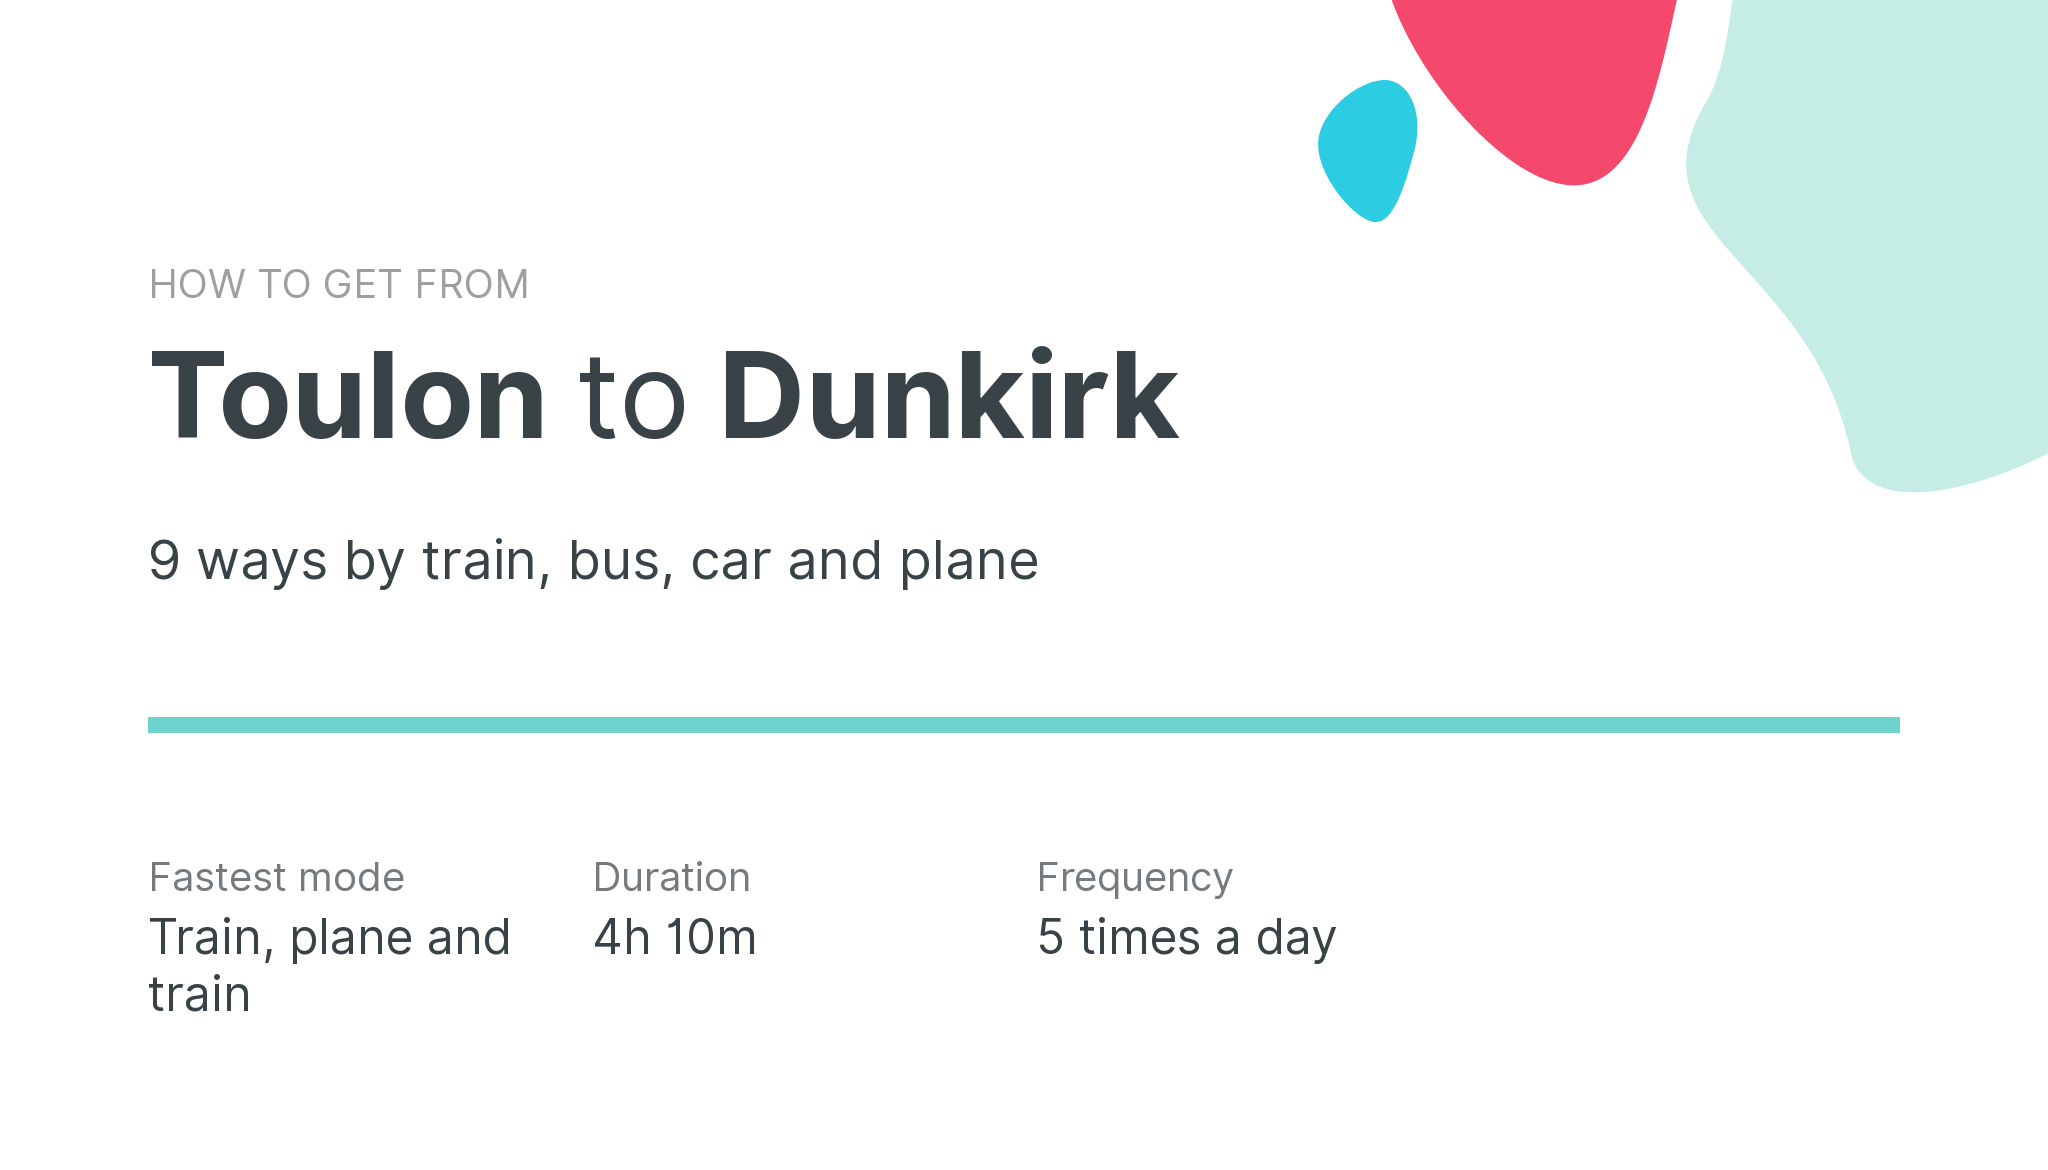 How do I get from Toulon to Dunkirk